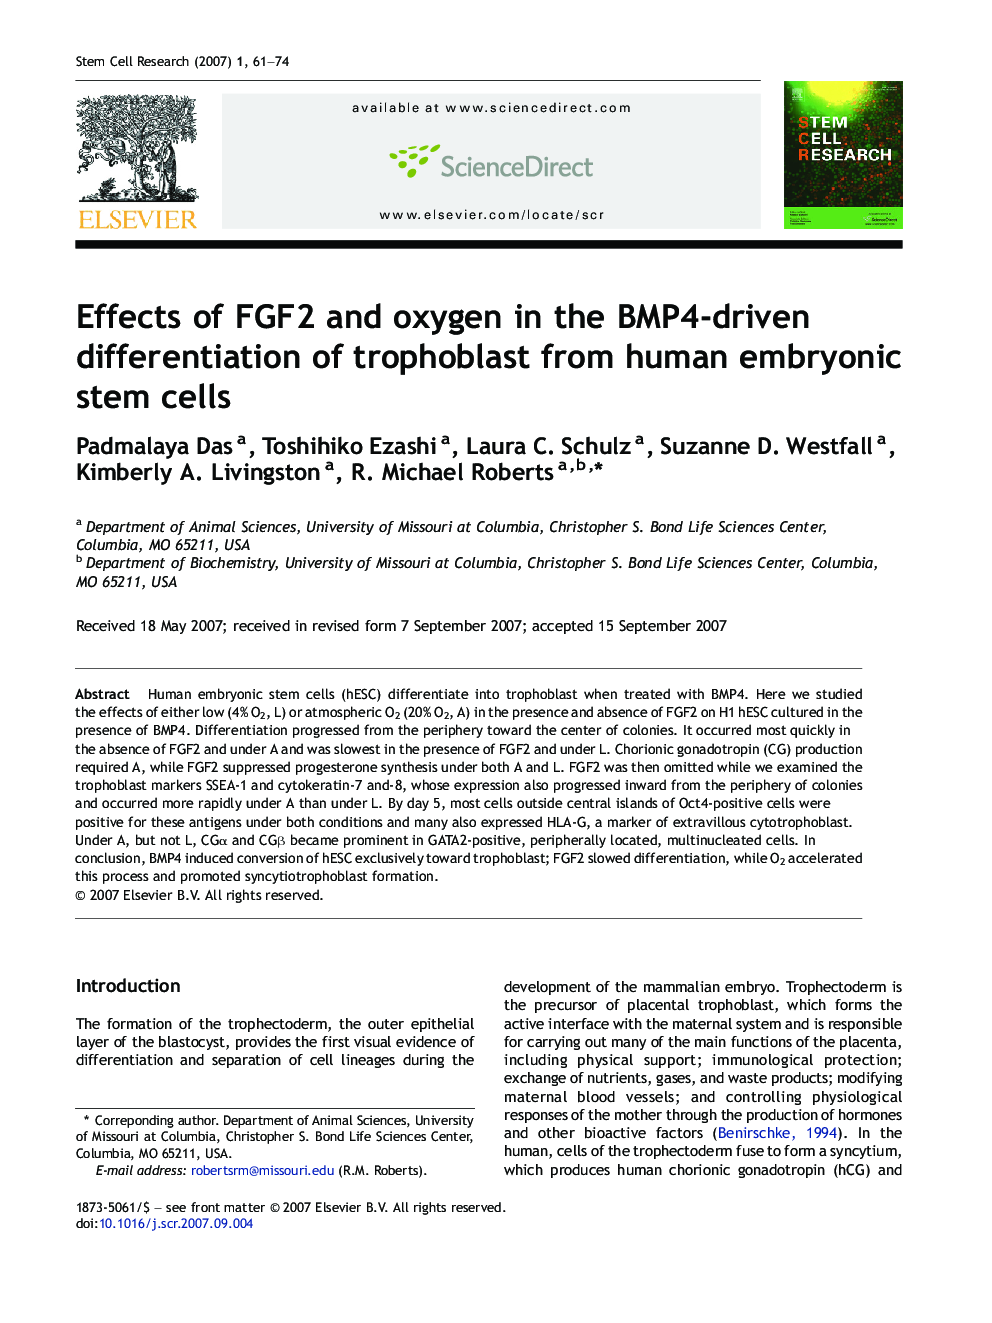 Effects of FGF2 and oxygen in the BMP4-driven differentiation of trophoblast from human embryonic stem cells